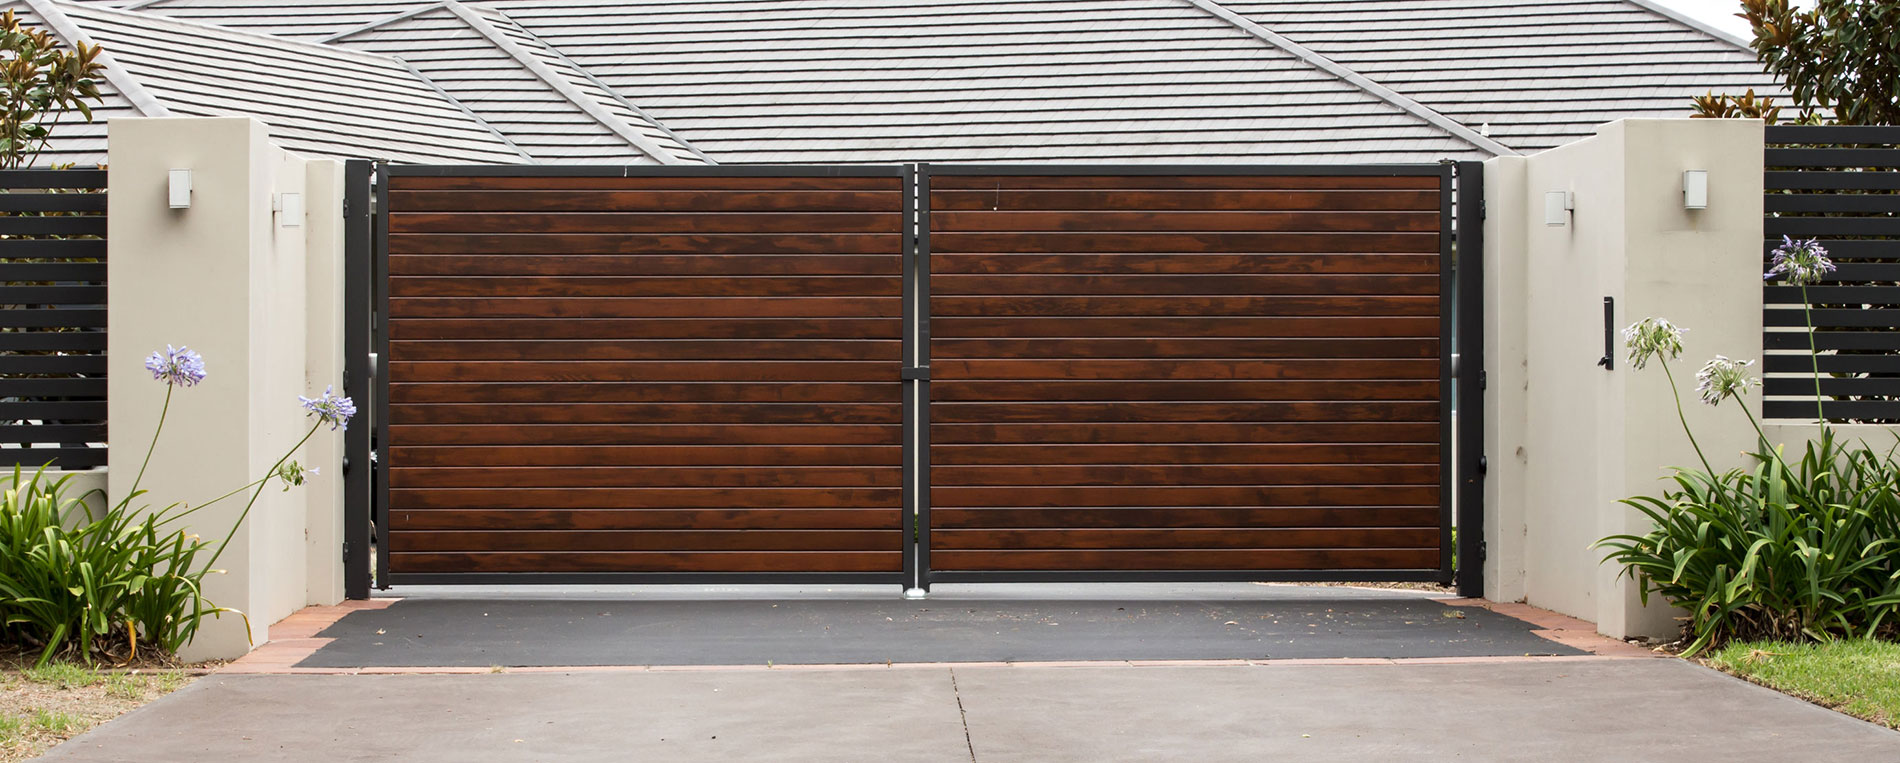 Common Problems of Driveway Gates